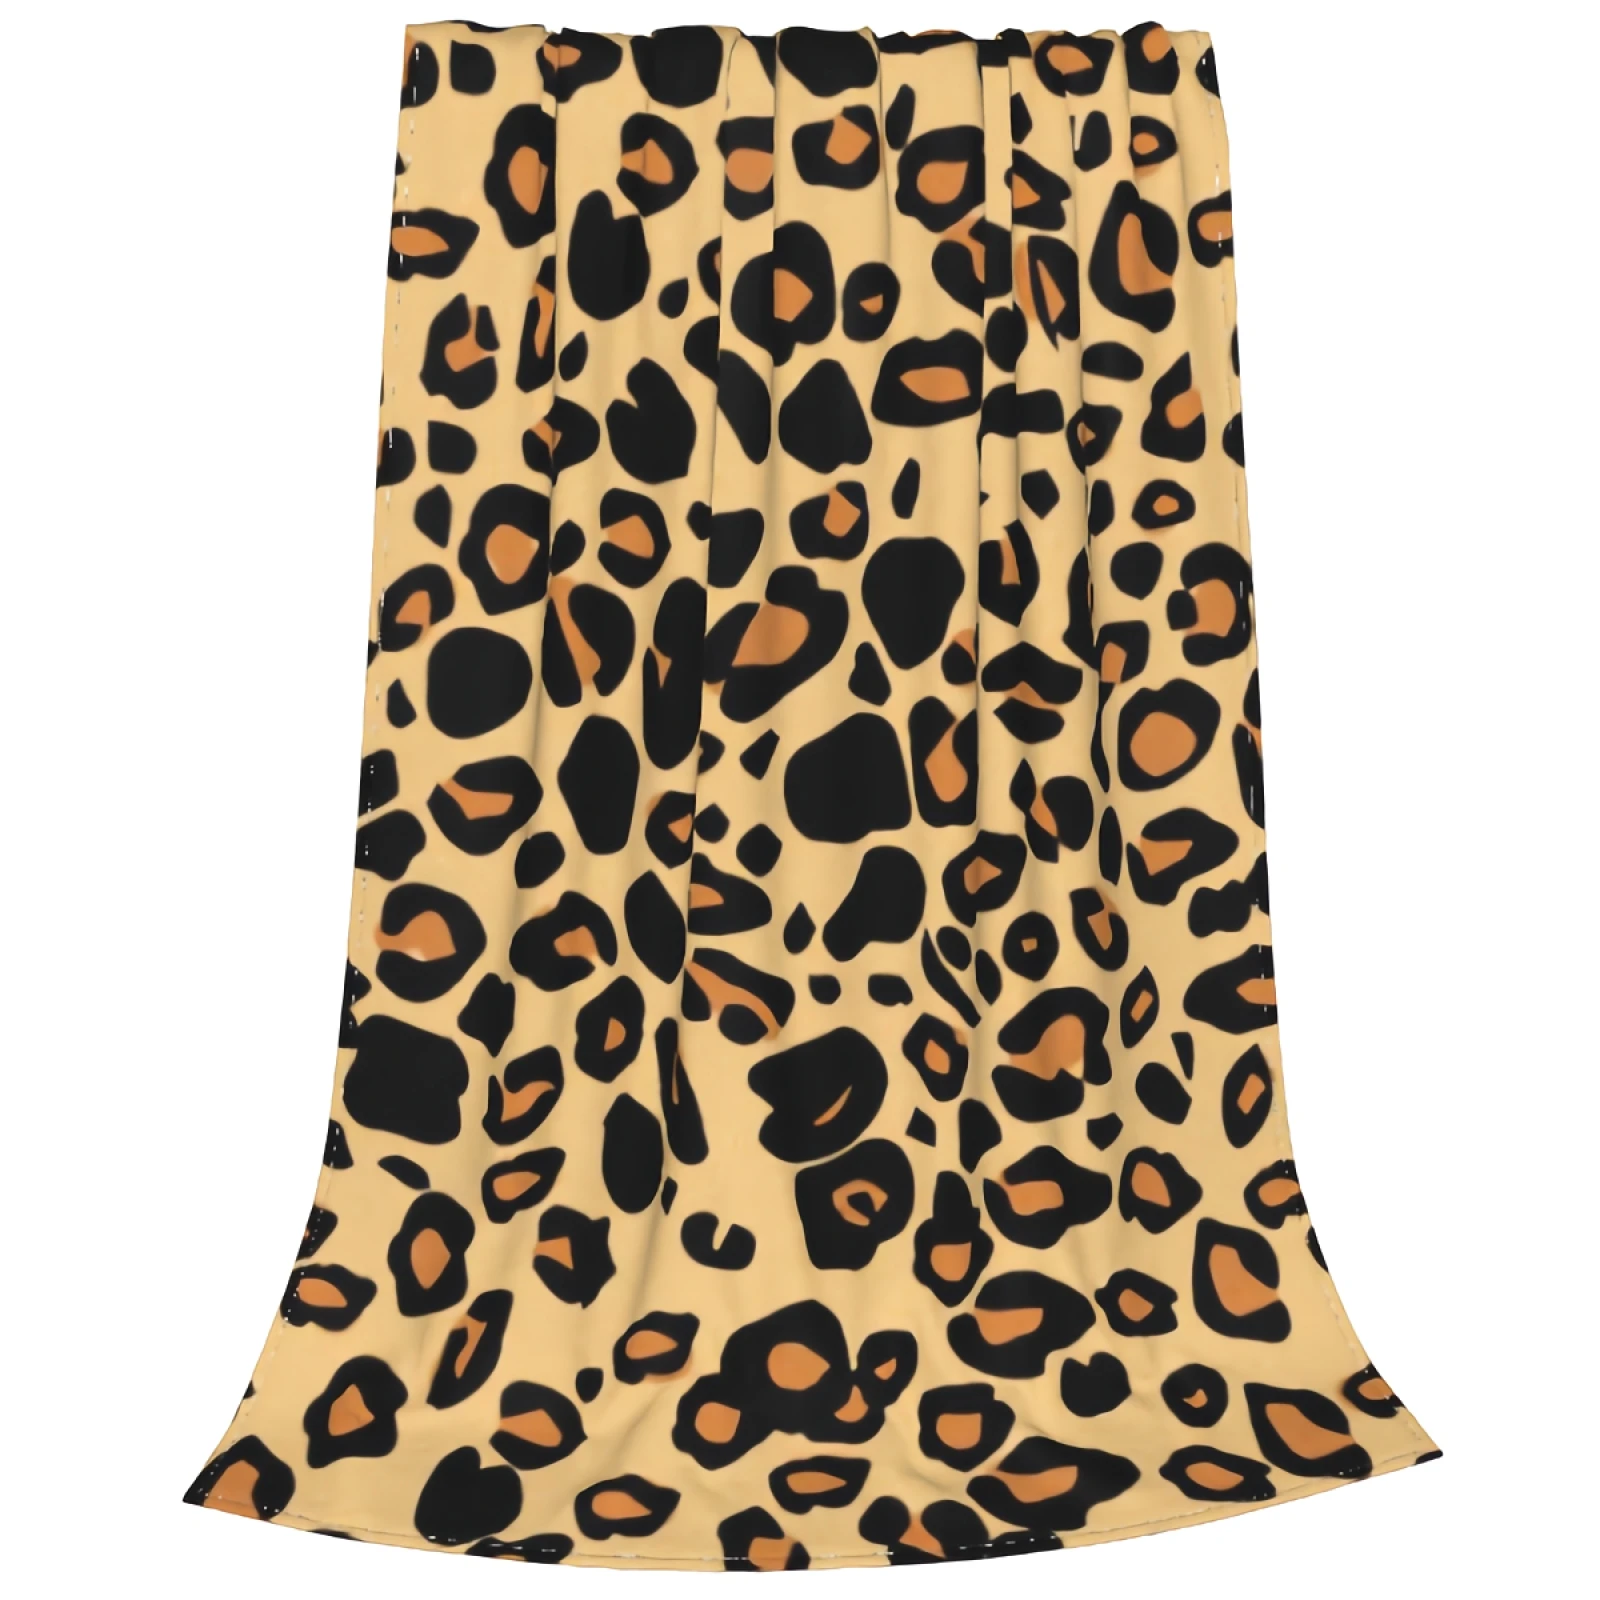 

Leopard Spots Throw Blanket Super Soft Cozy Flannel Fleece Warm Animal Skin Throw Blanket Home Decor Fuzzy Throws for Bed Couch